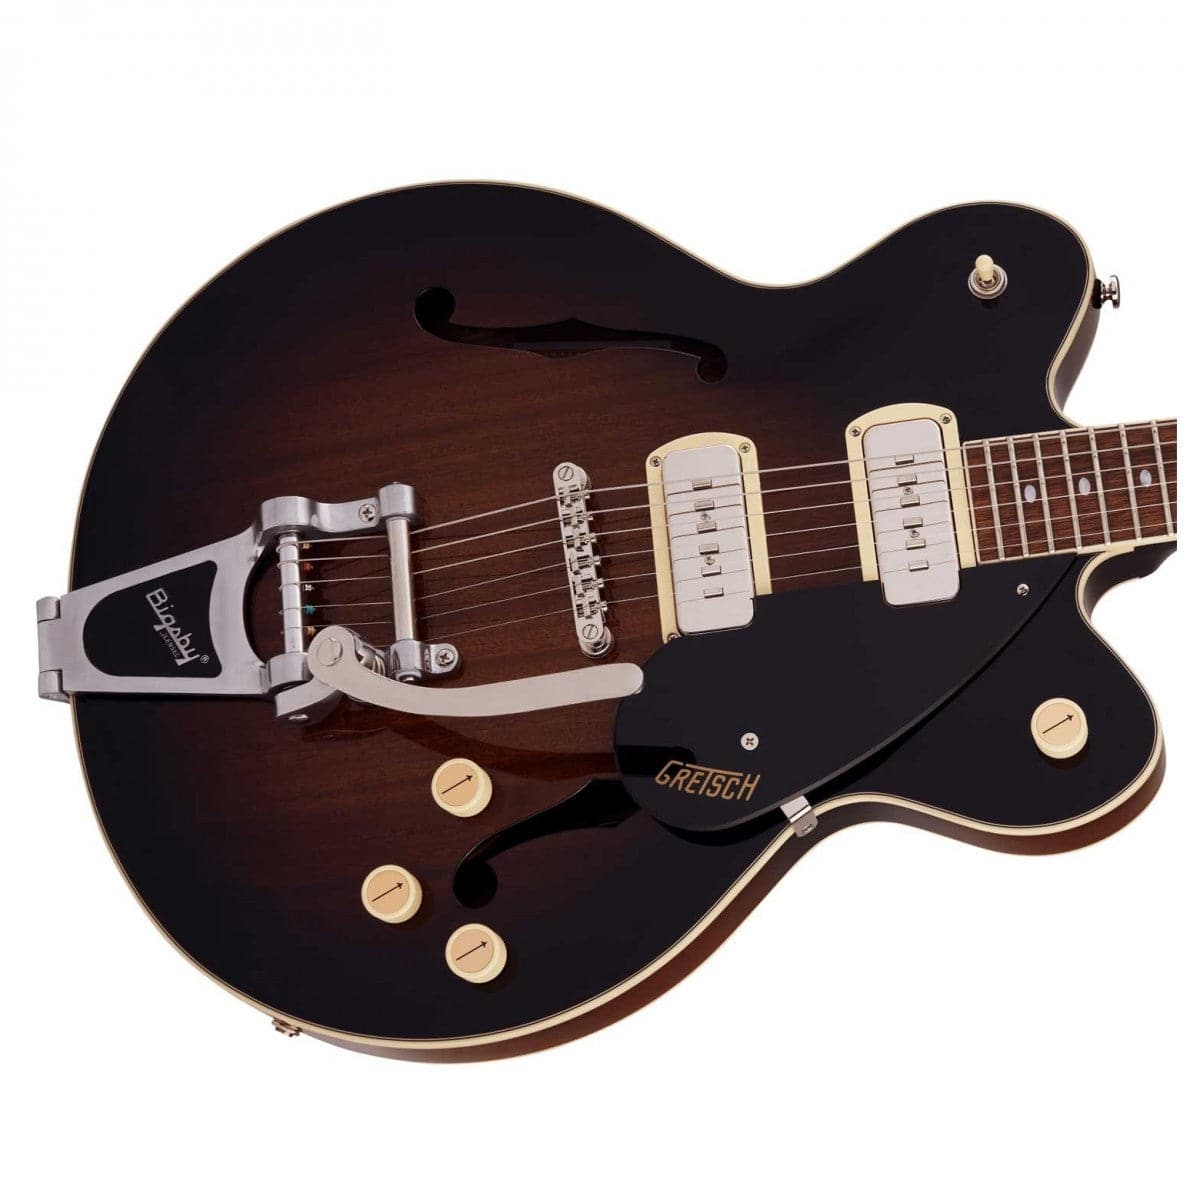 Gretsch G2622T-P90 Streamliner Centre Block Double Cut with Bigsby - Forge Glow